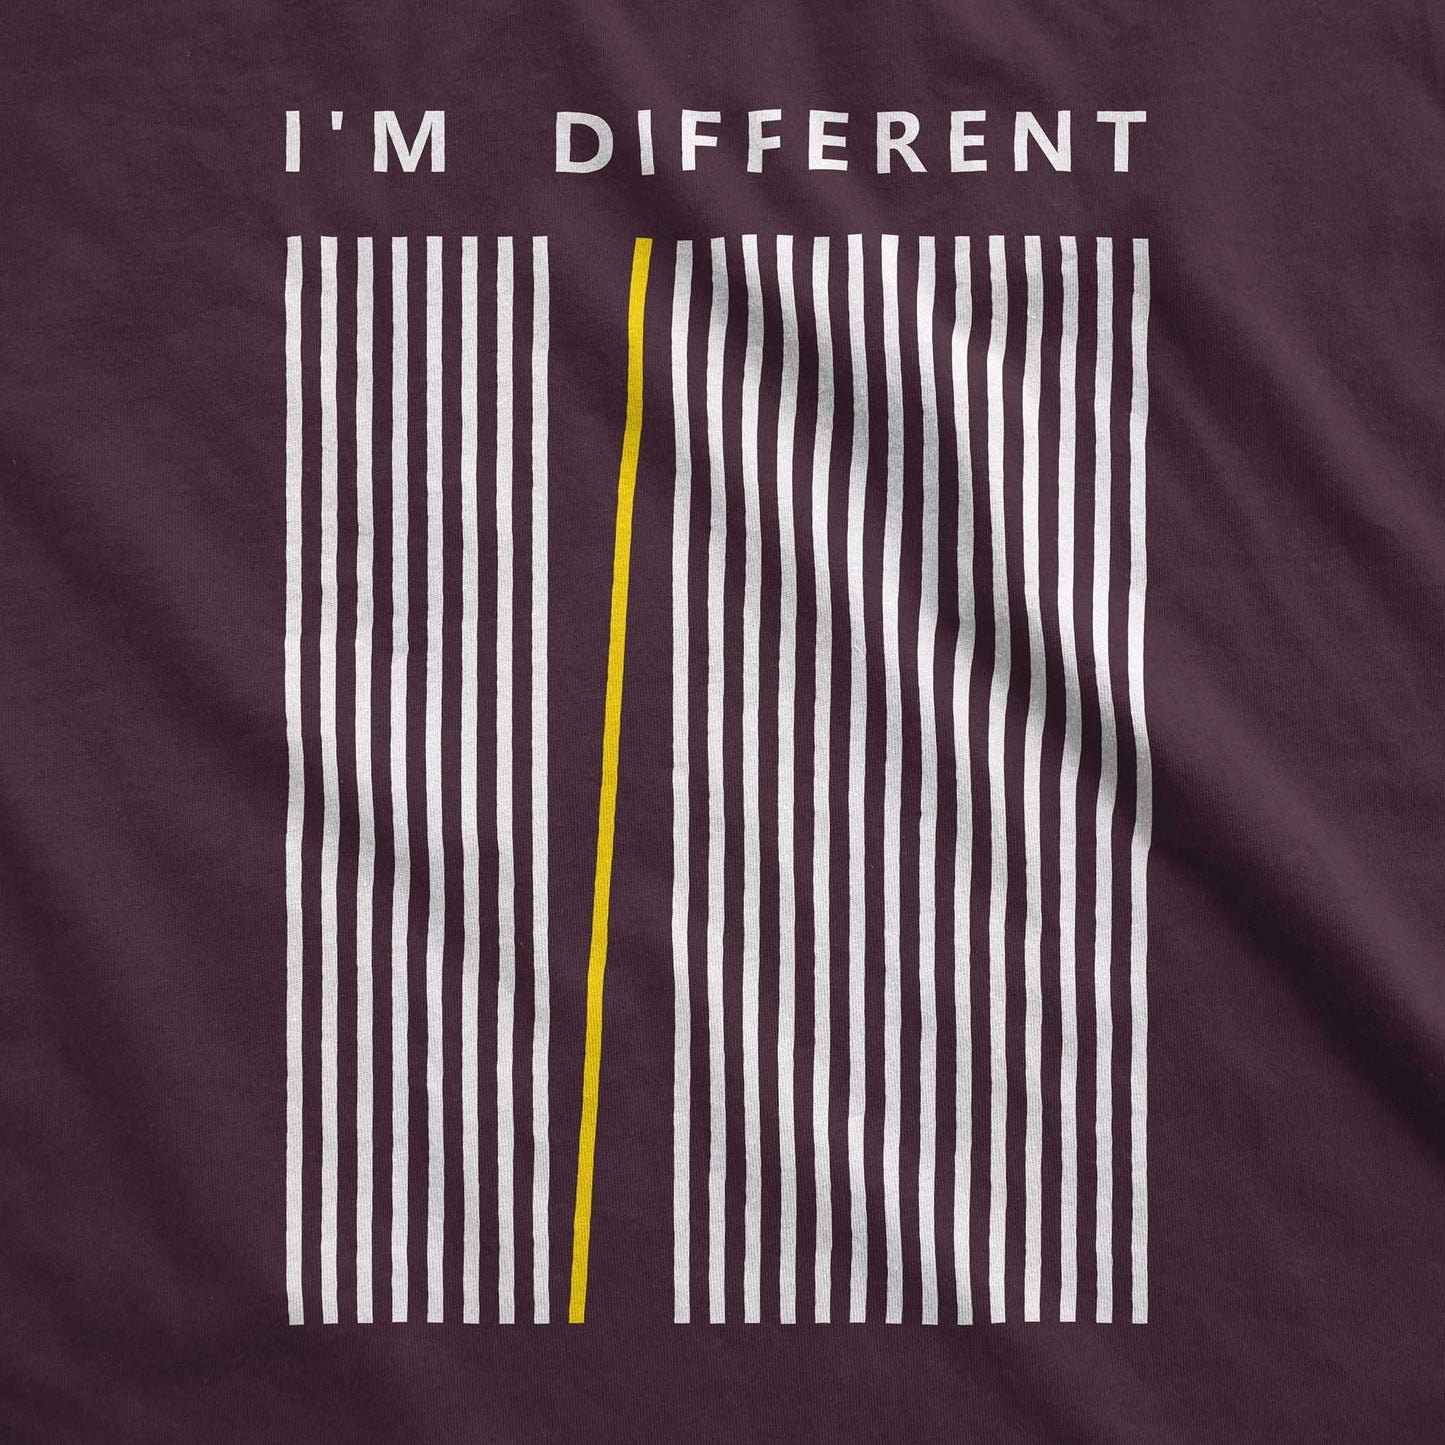 An oxblood black swatch featuring several white straight lines and one yellow leaning line.